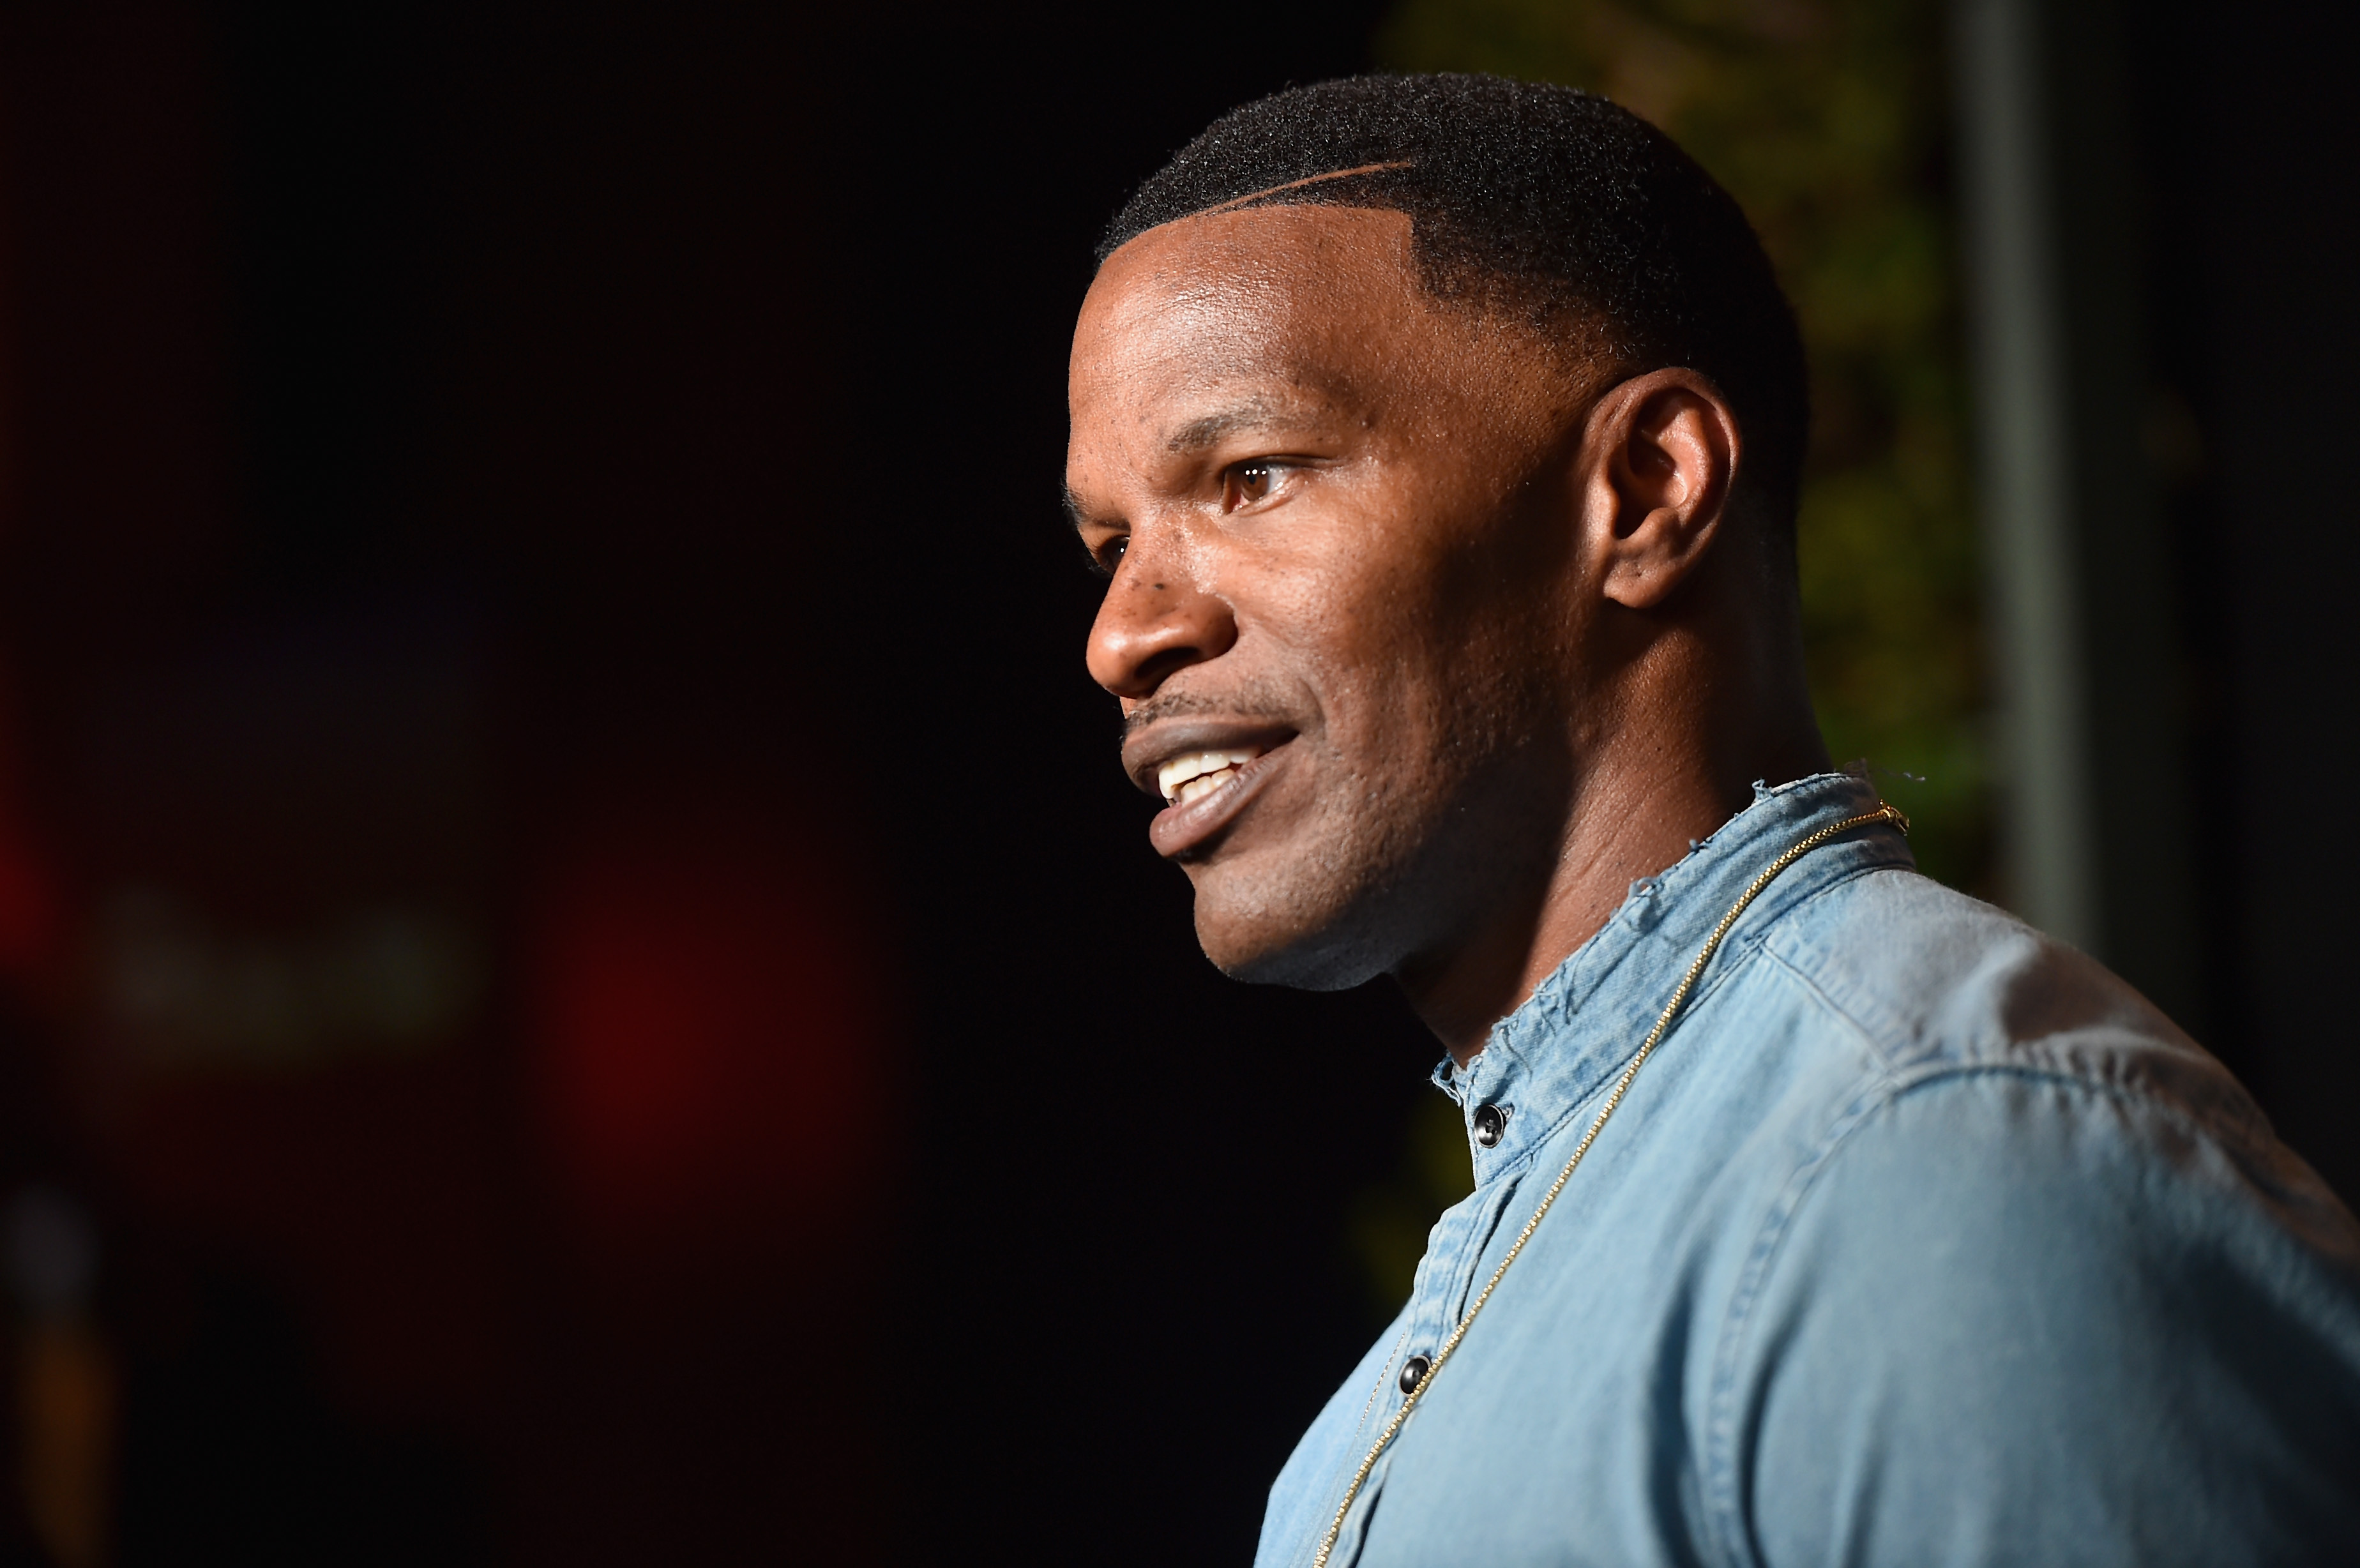 Actor Jamie Foxx attends the Samsung Galaxy S6 Edge Plus and Note 5 Launch party on Aug. 18, 2015 in West Hollywood, California. (Alberto E. Rodriguez—Getty Images)